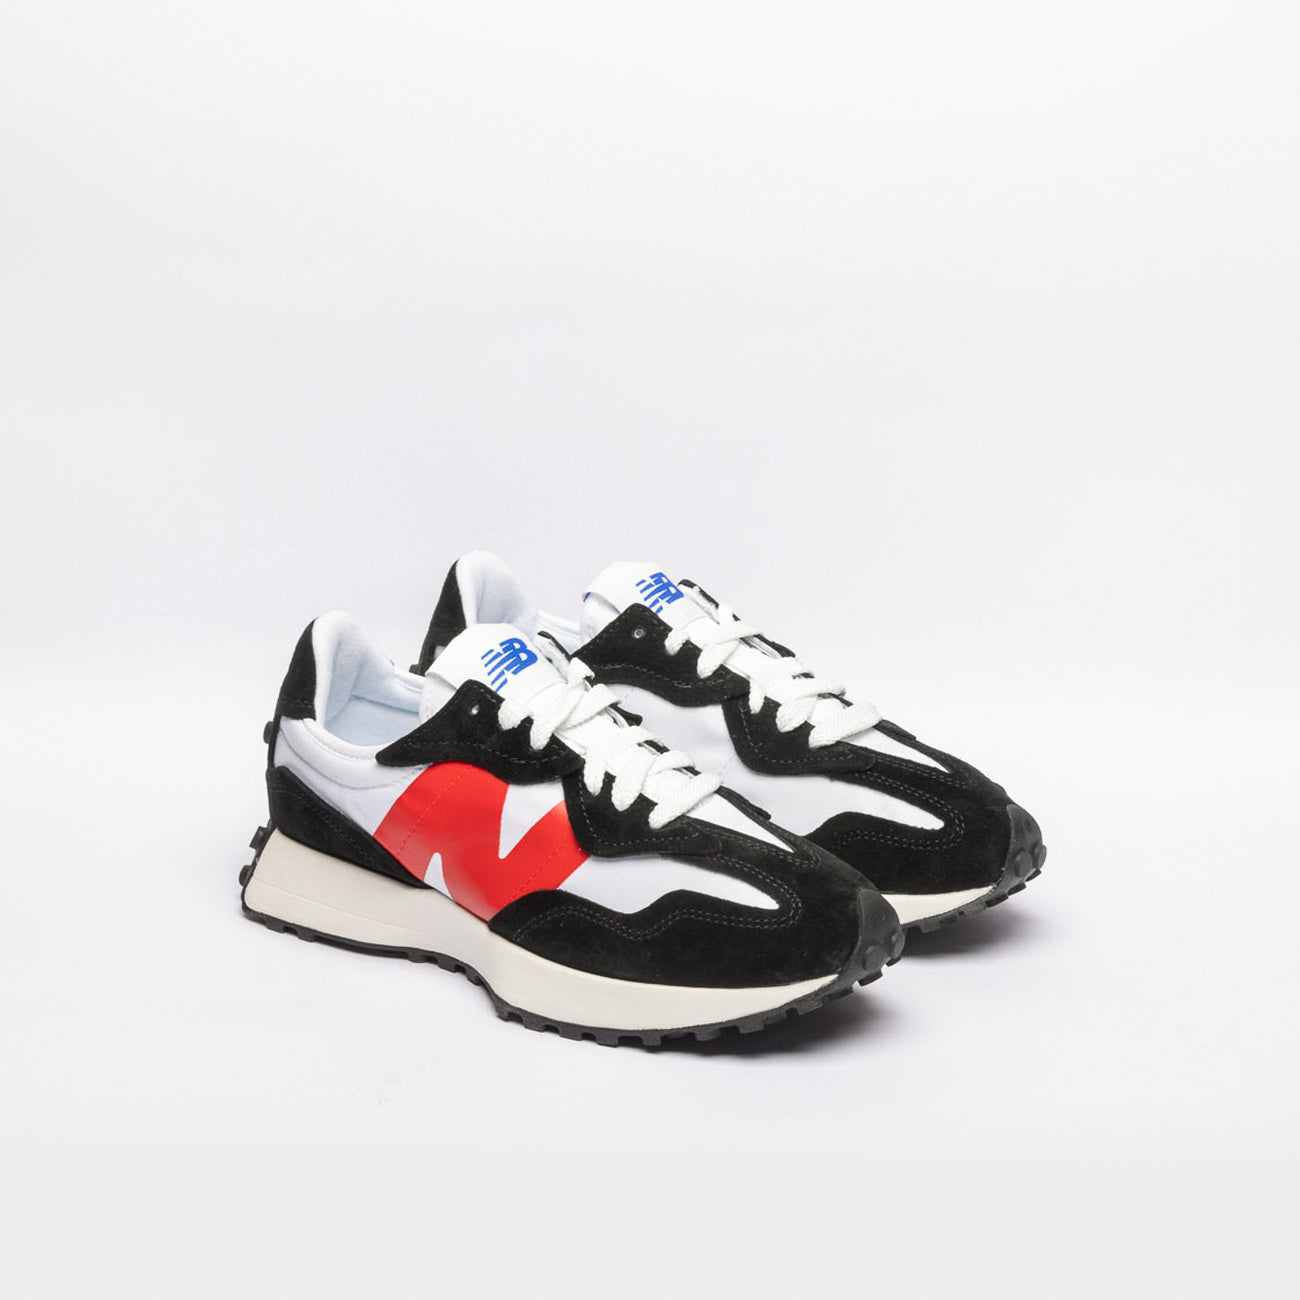 New Balance 327 white fabric and black suede running sneaker